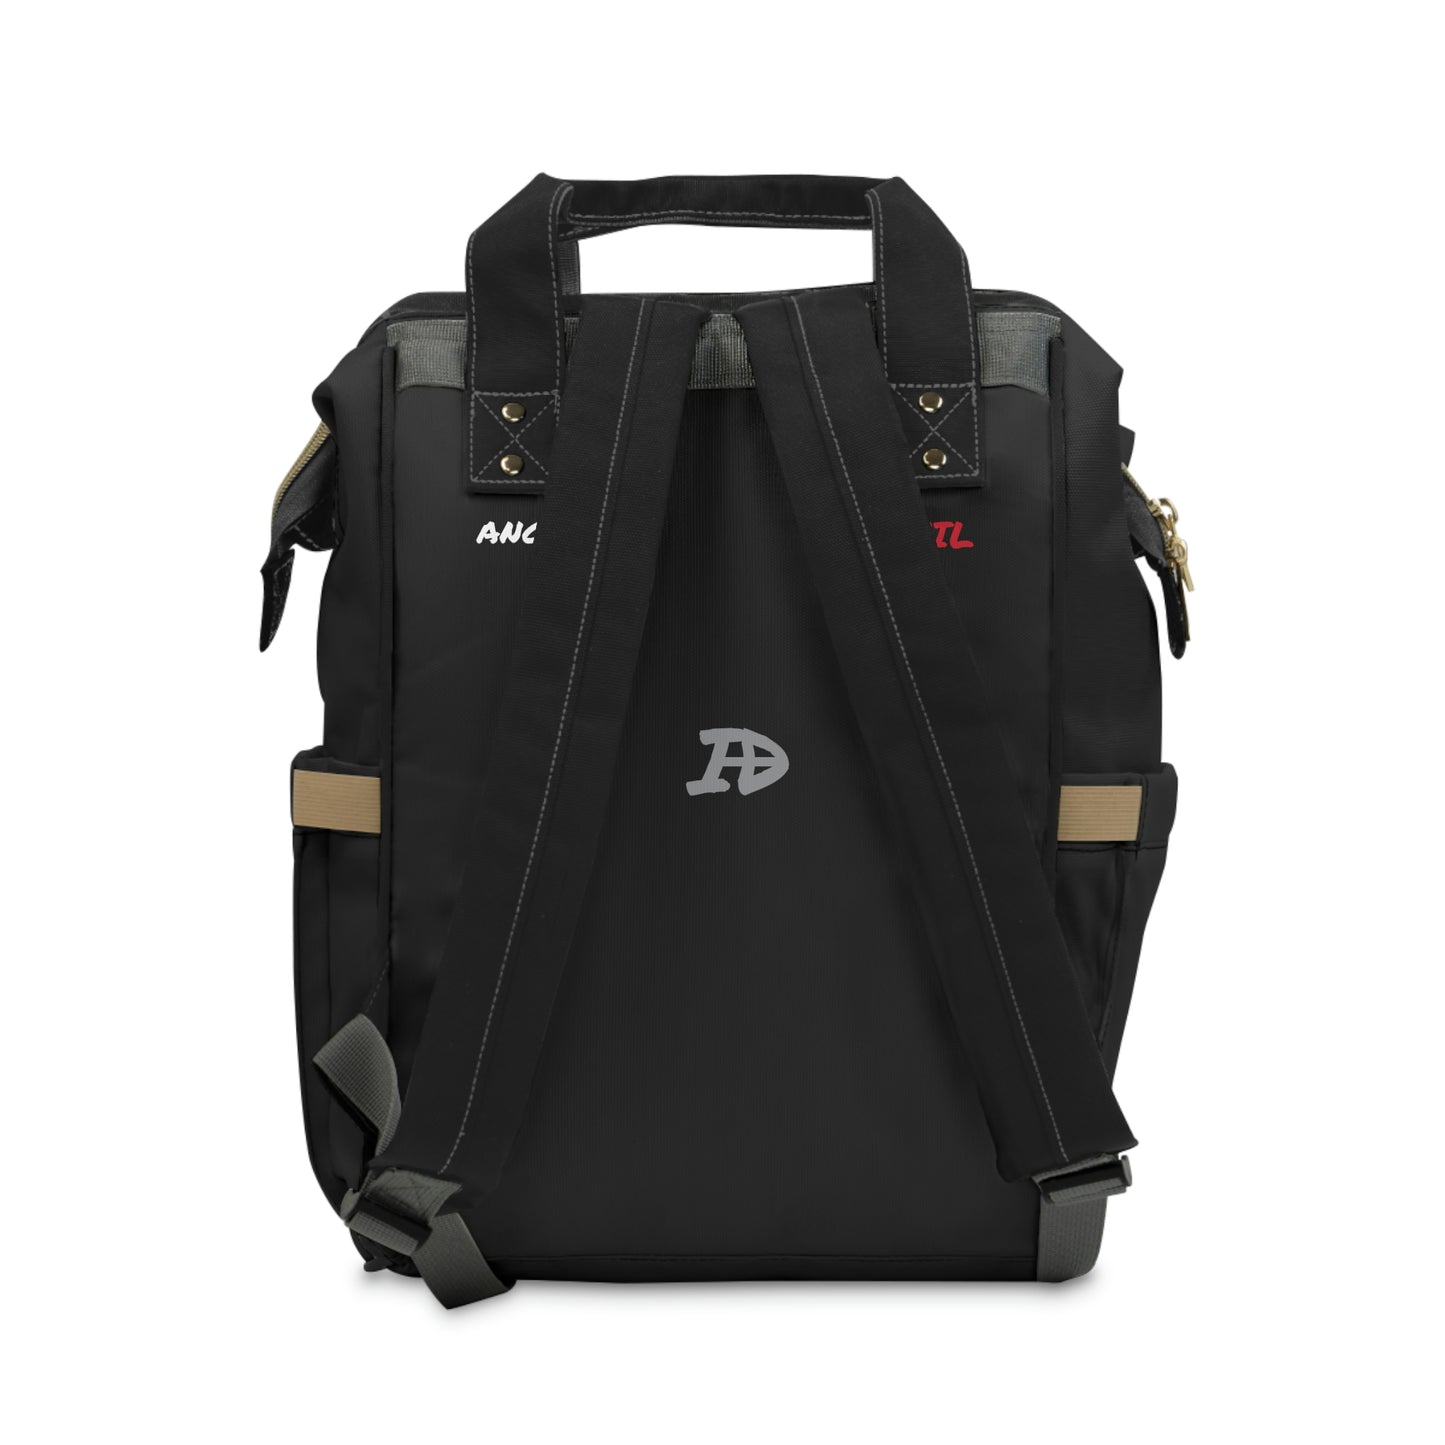 "Reap What You Sow" IDology Multifunctional Backpack